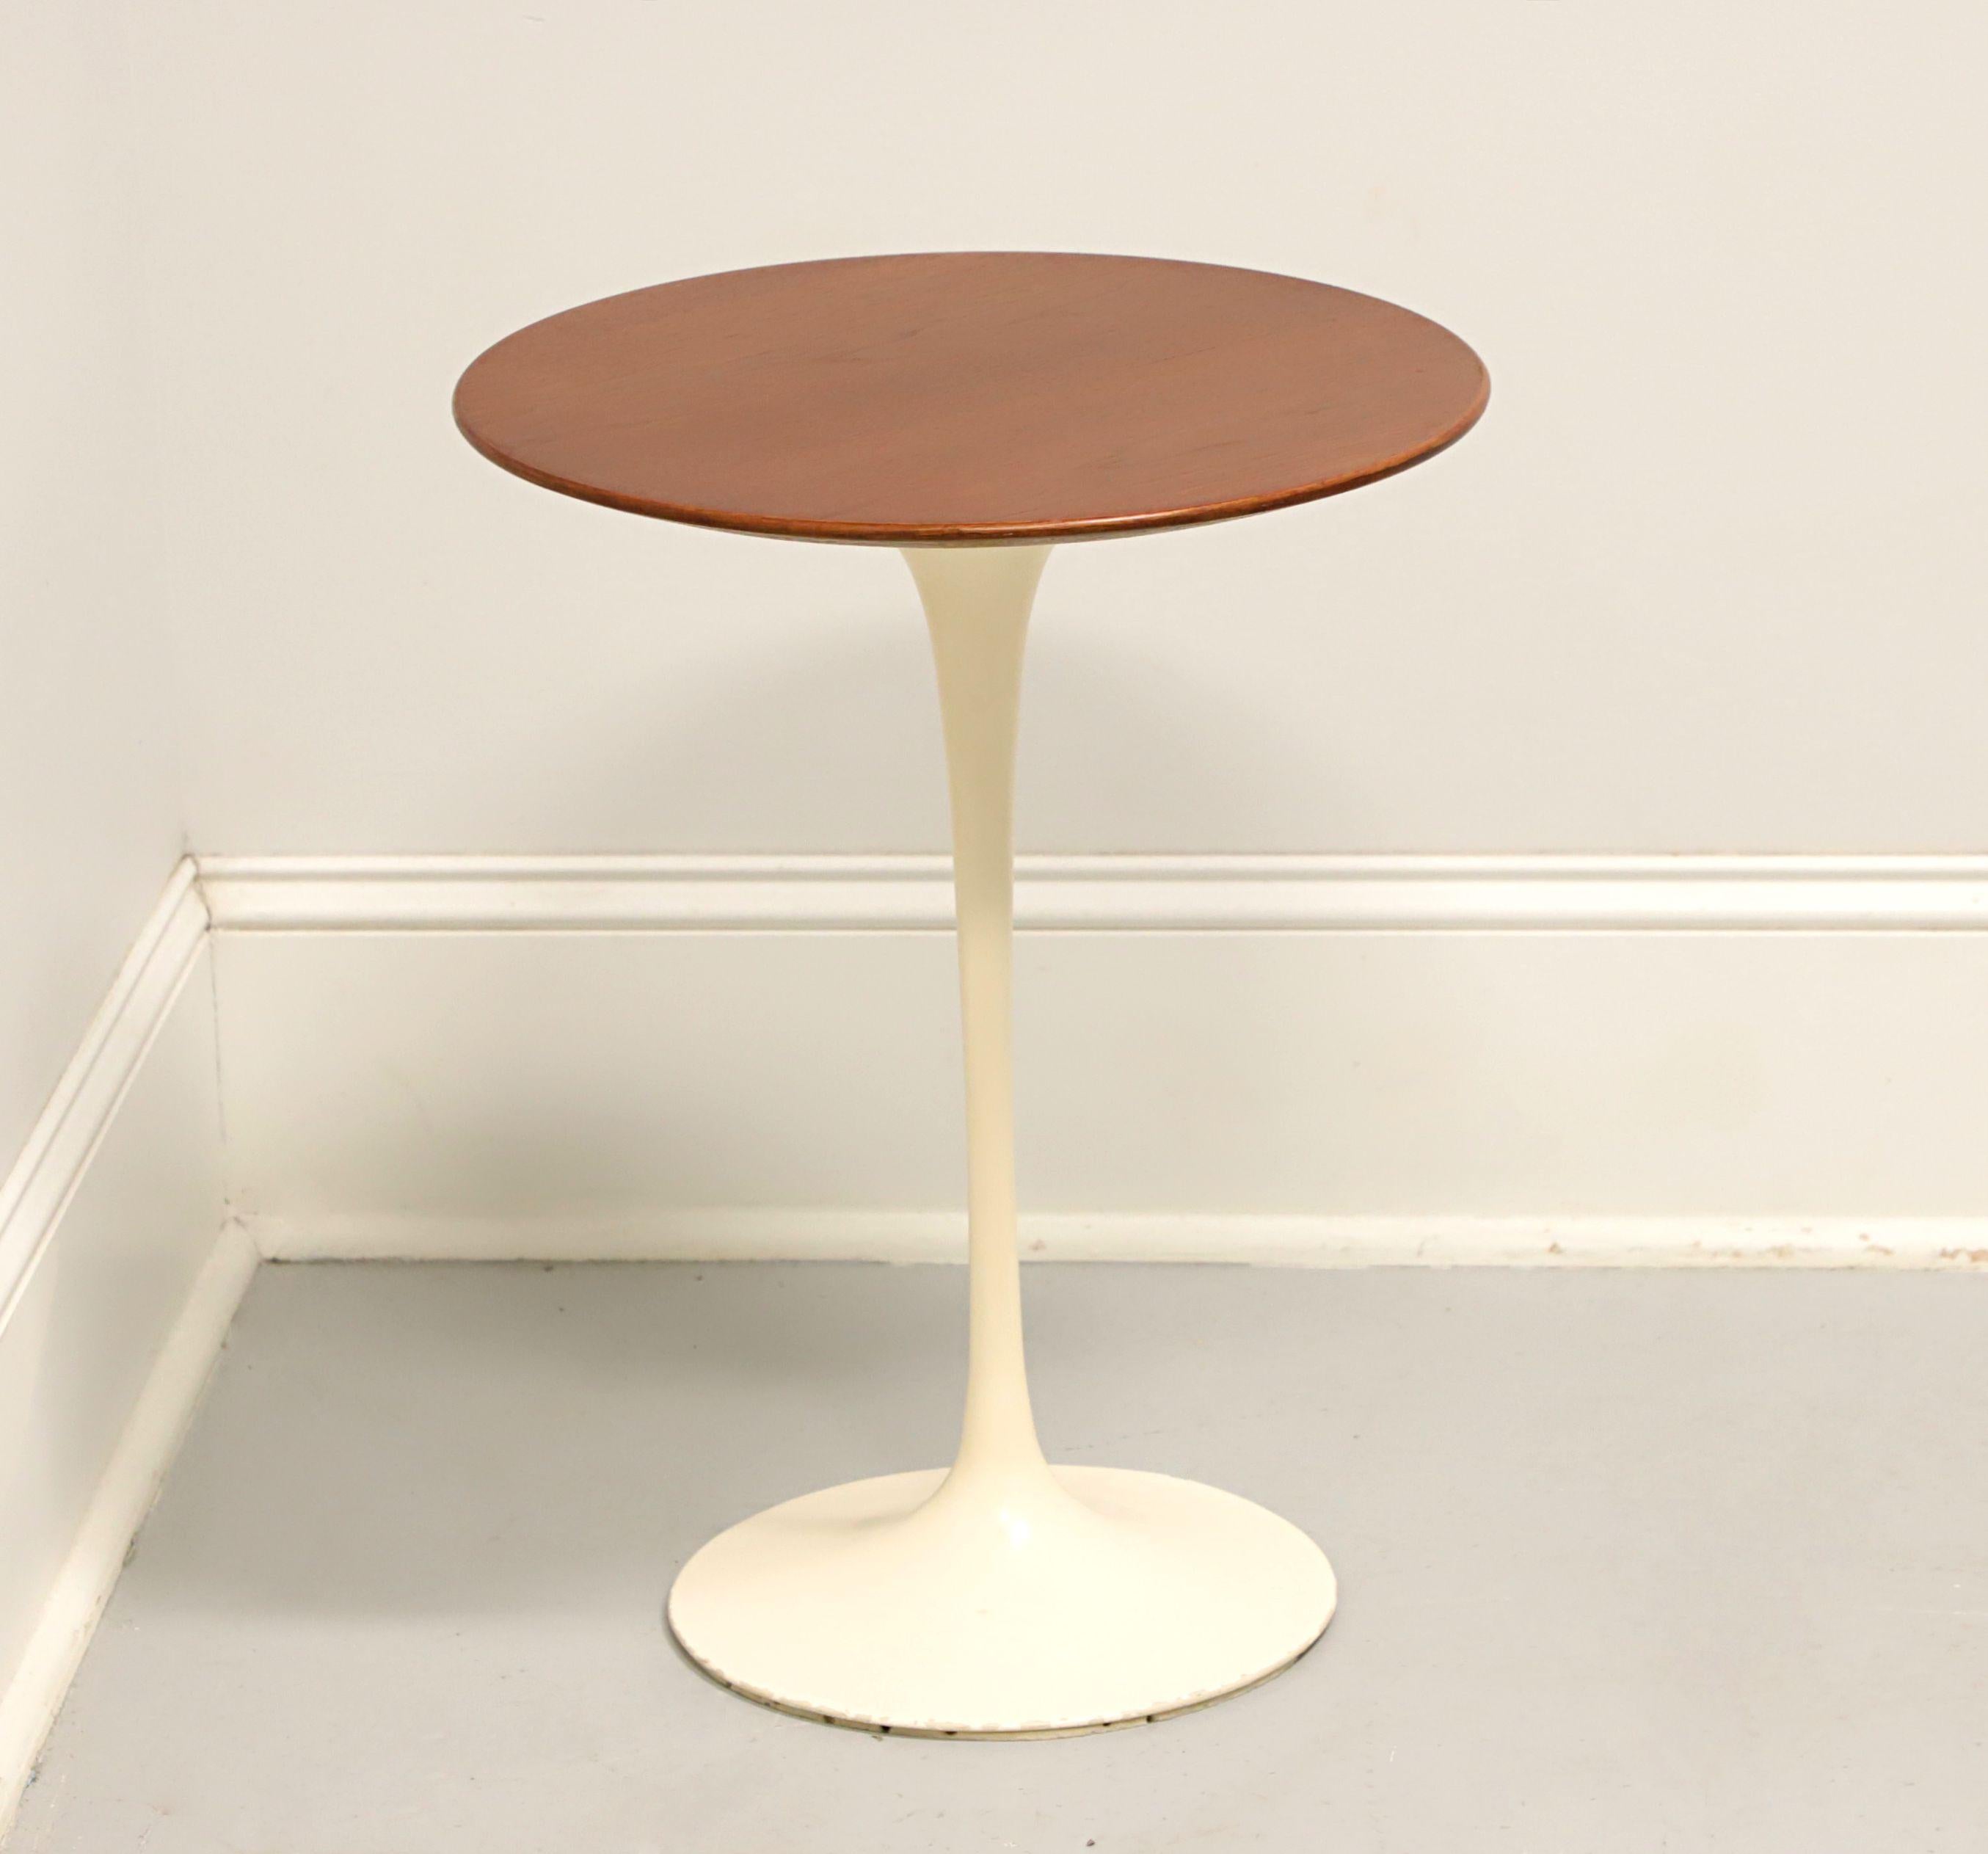 A Mid 20th Century Modern style round side table by Finnish-American designer, Eero Saarinen, for Knoll. Walnut top with a cream color painted aluminum base and having a uniquely modern tulip shape design. Made in the USA, circa 1972.

Measures: 16w